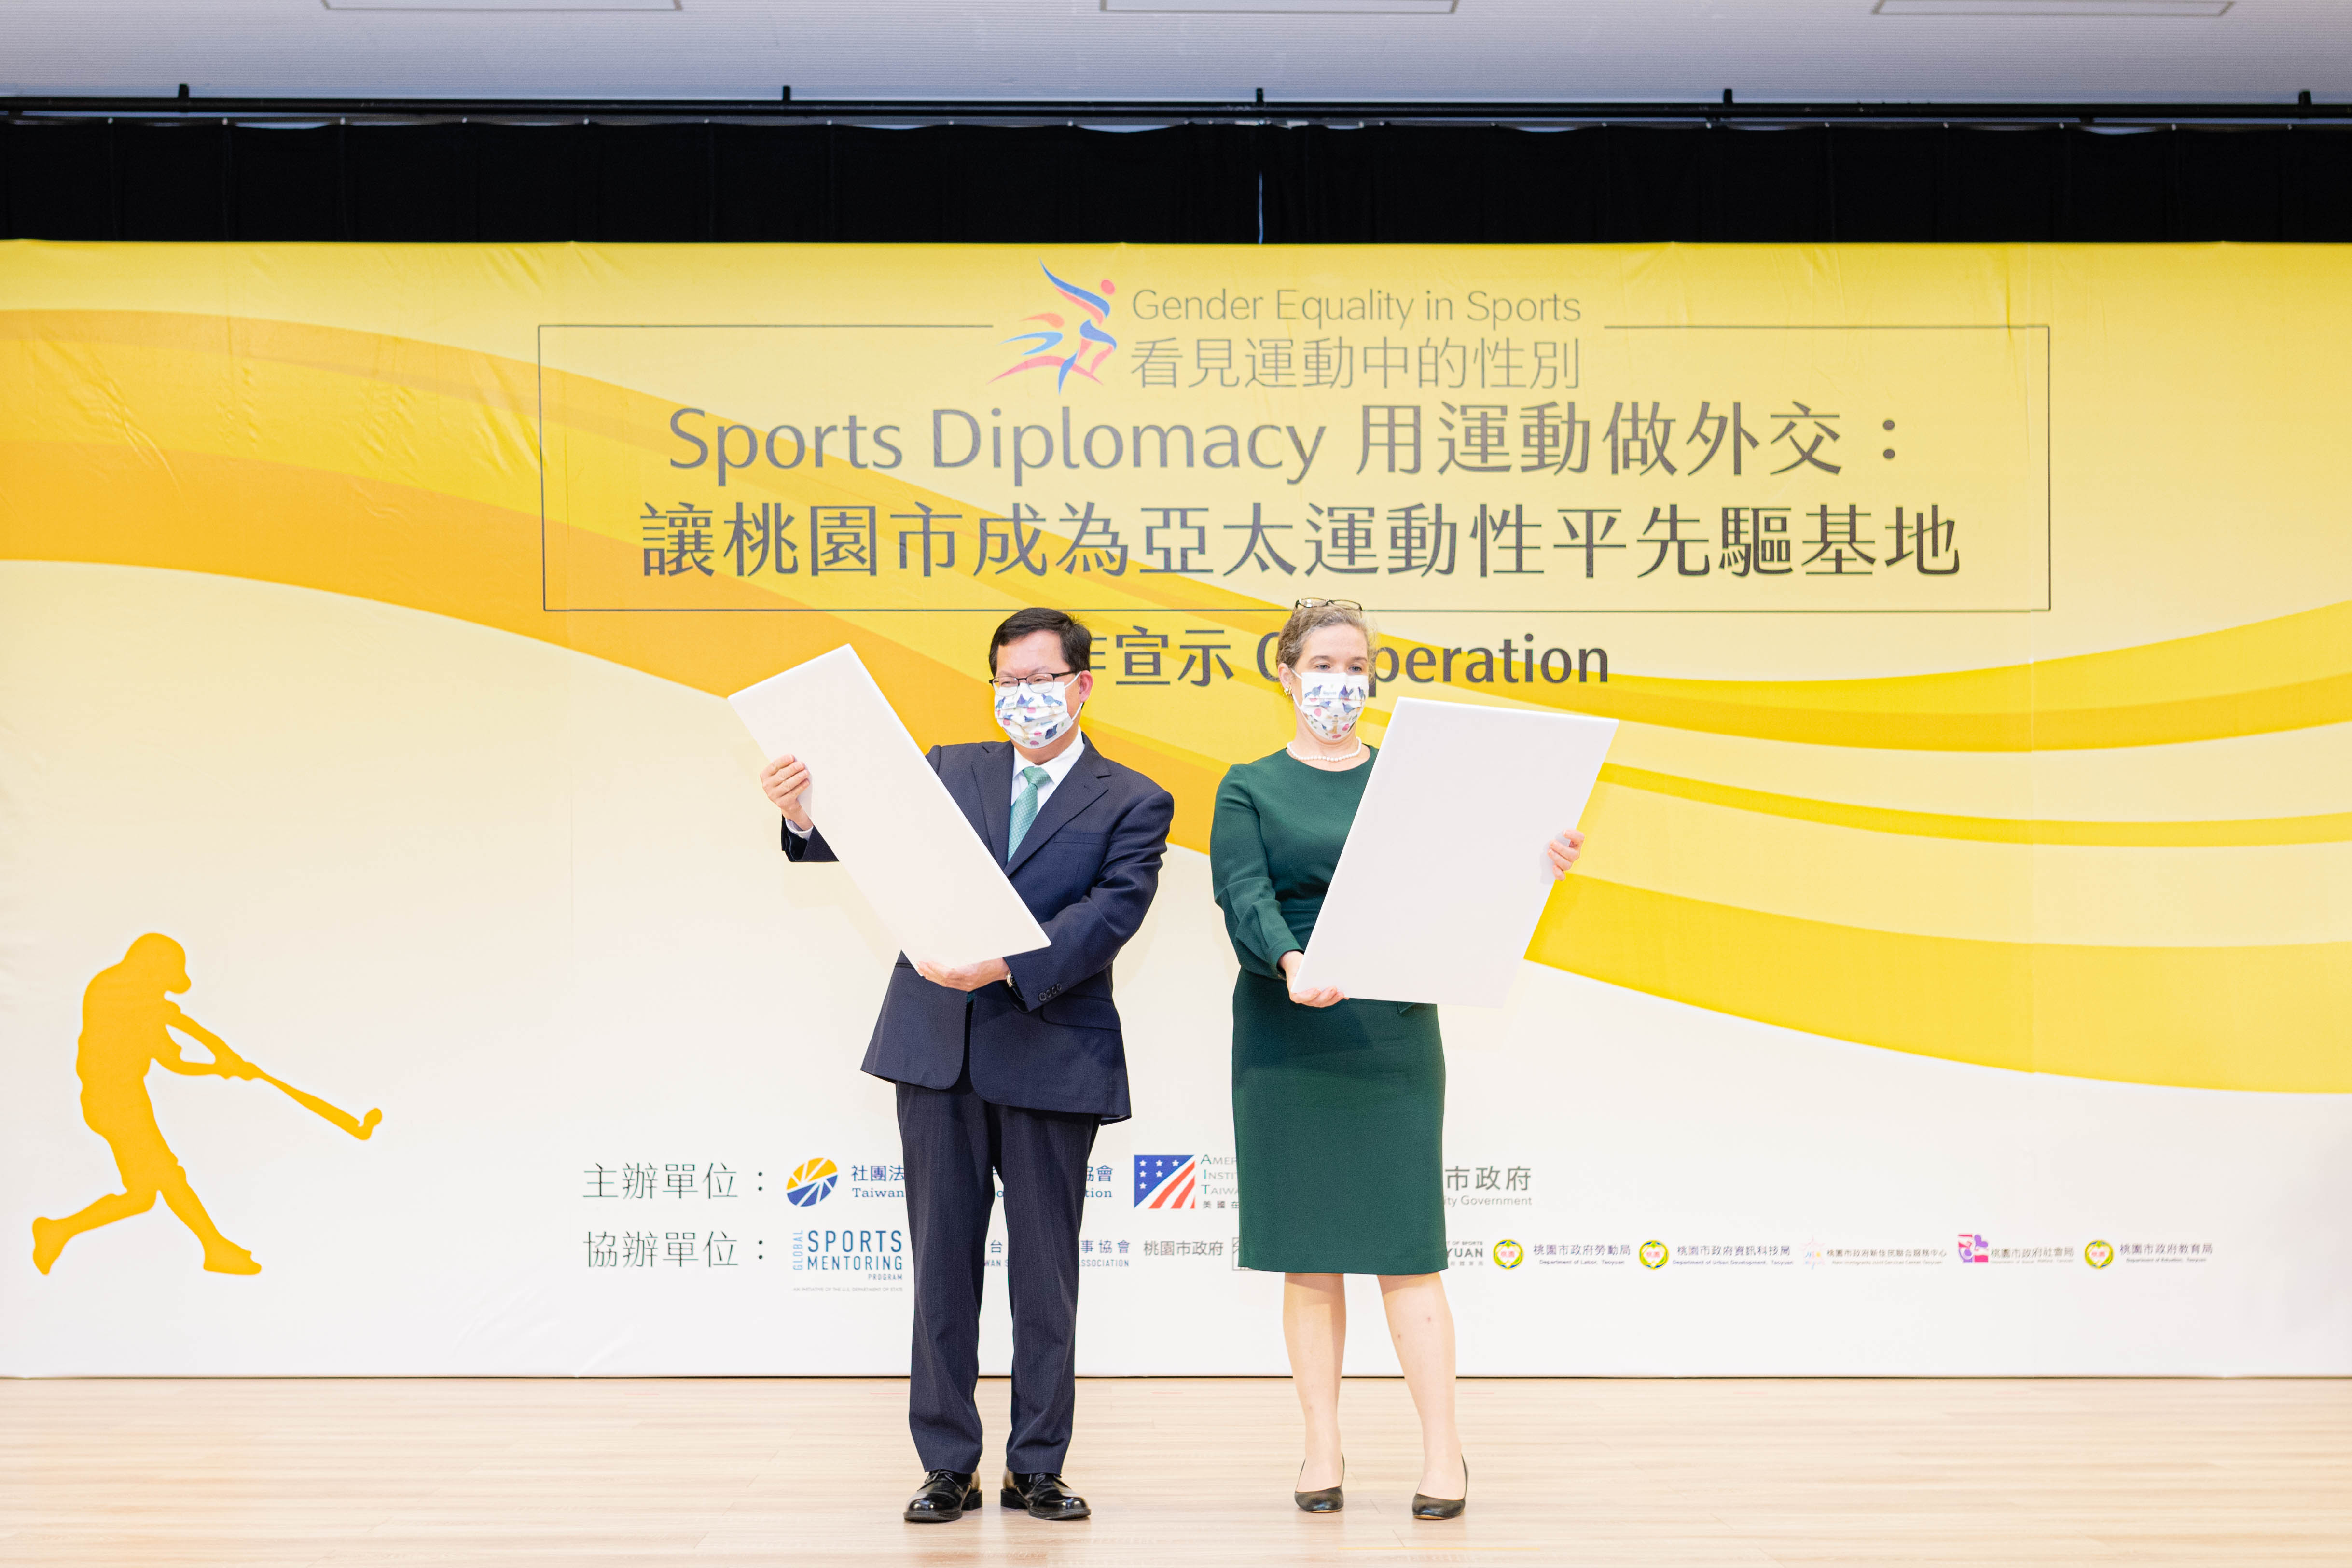 Taoyuan Mayor Cheng Wen-tsan pointed out that it is also important to promote sport diplomacy. (Photo / Provided by Taoyuan City Government)